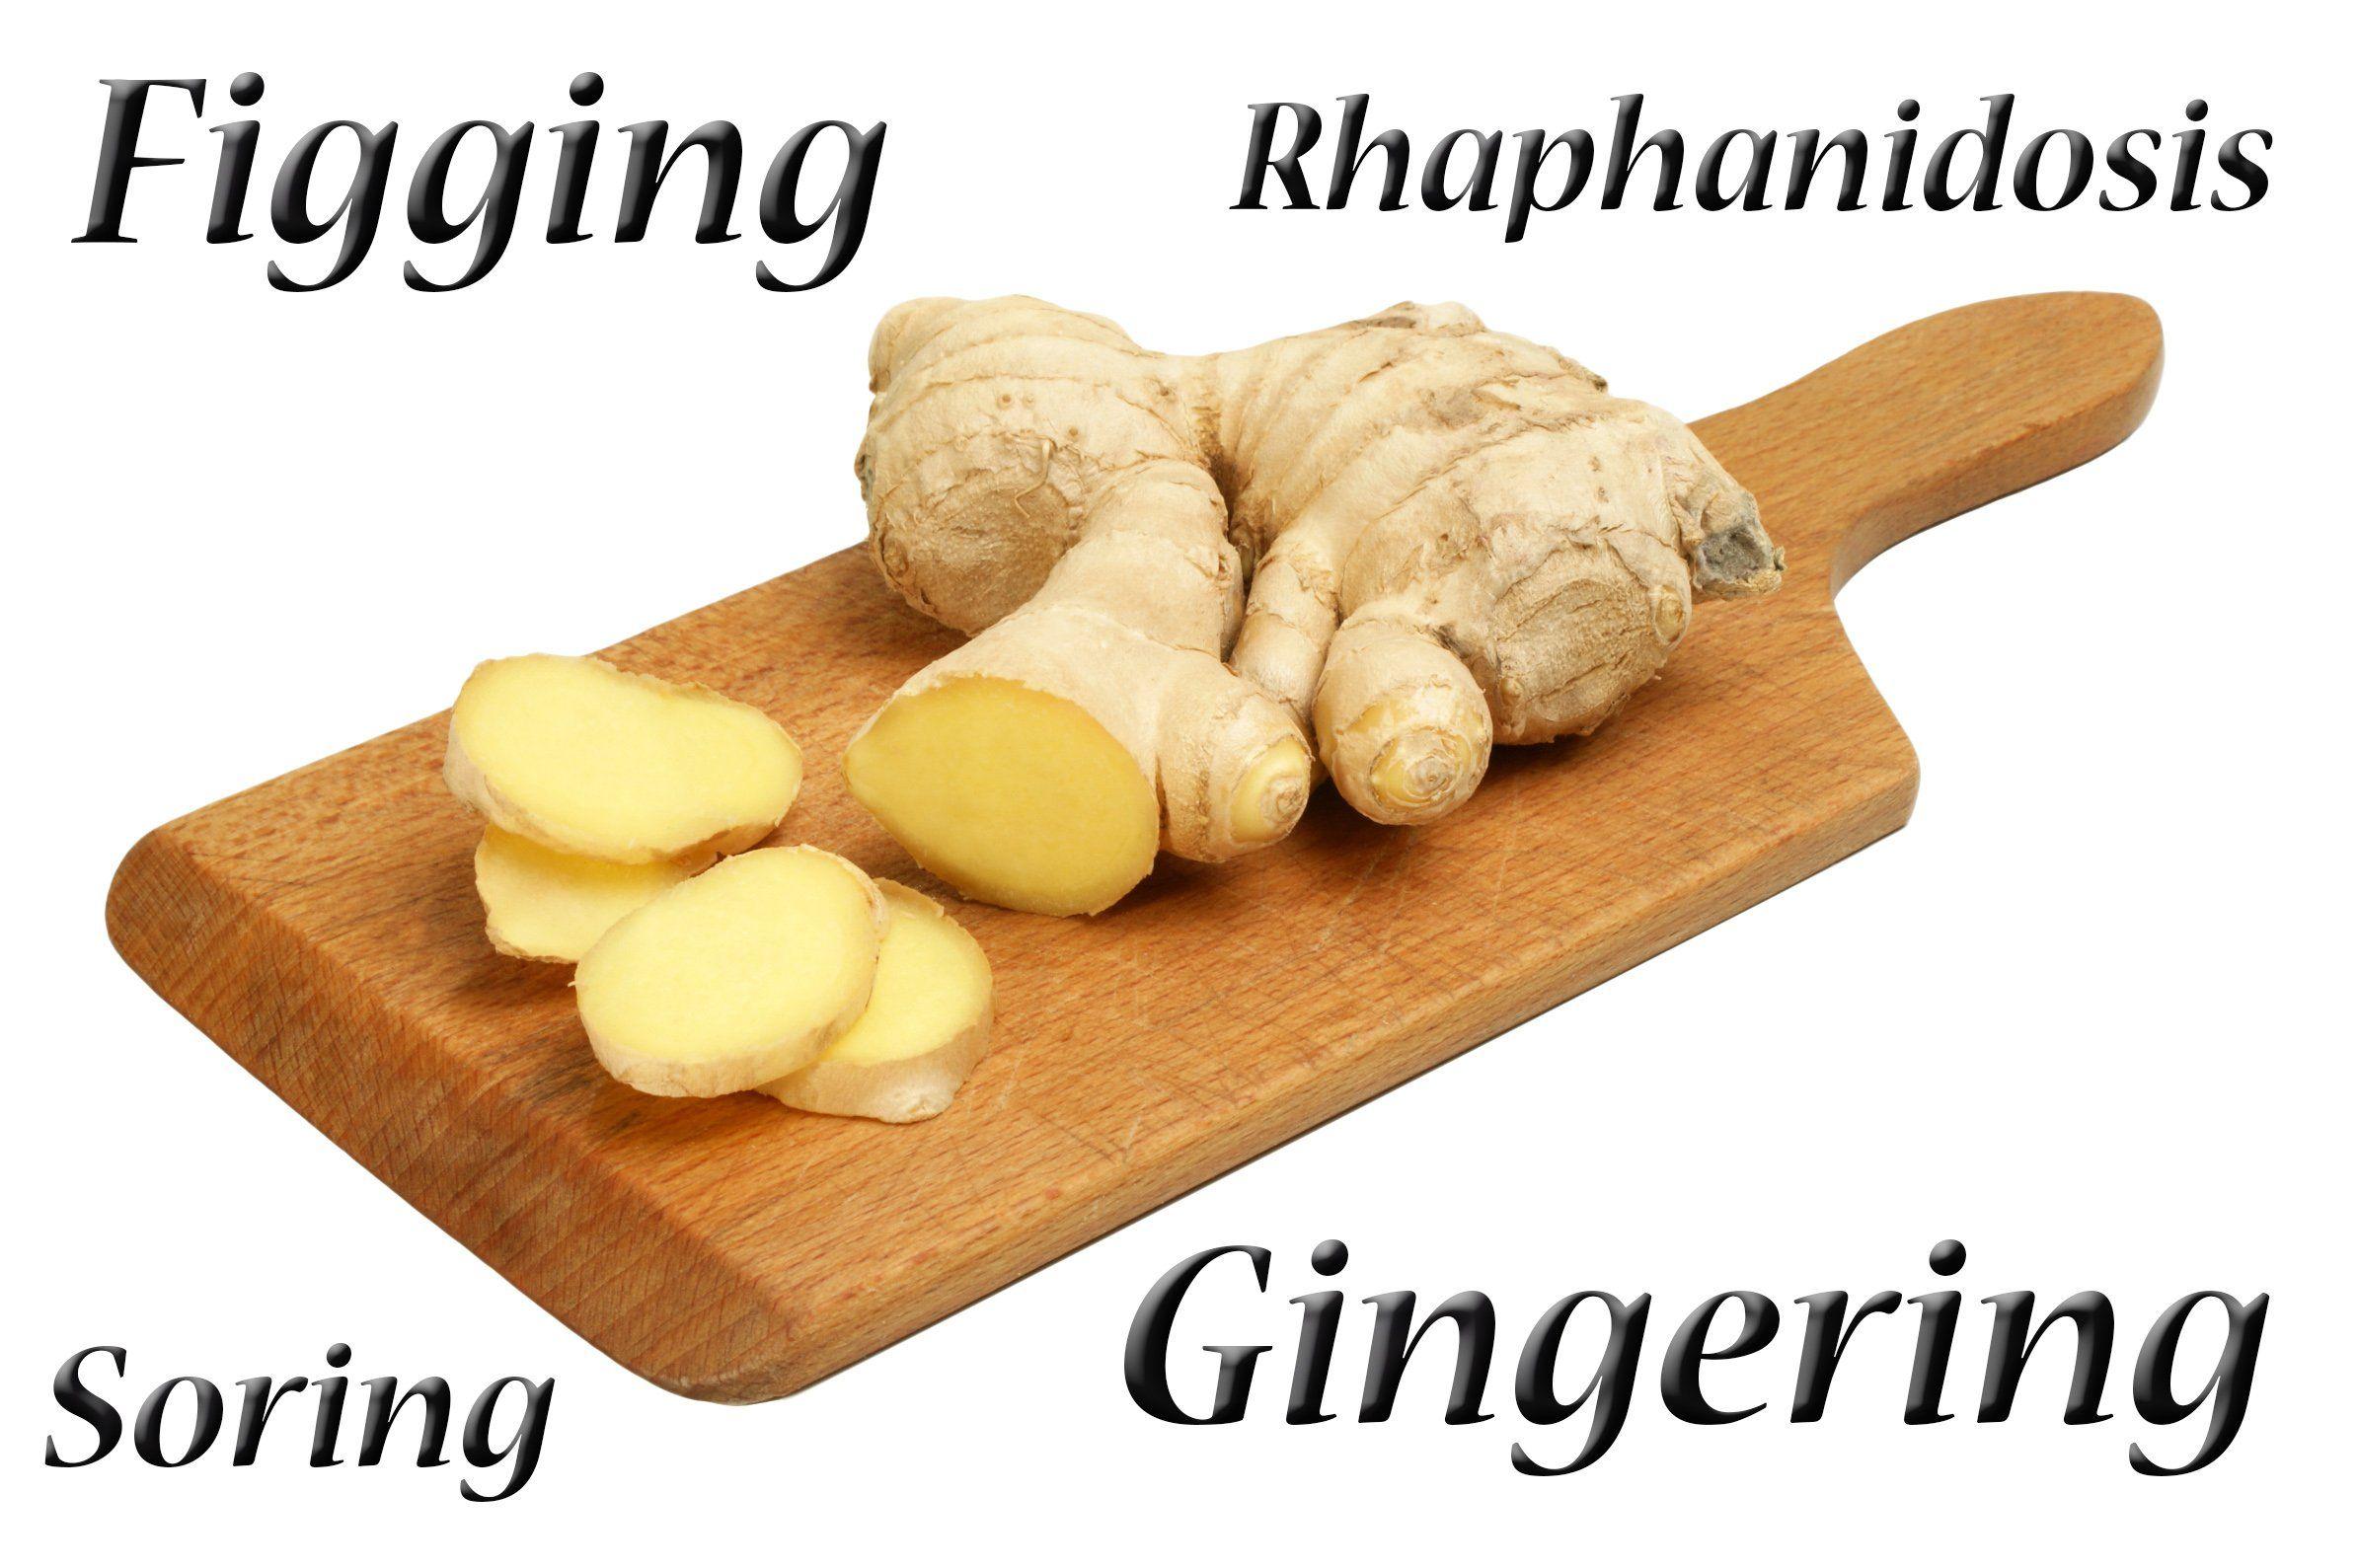 Anal ginger root